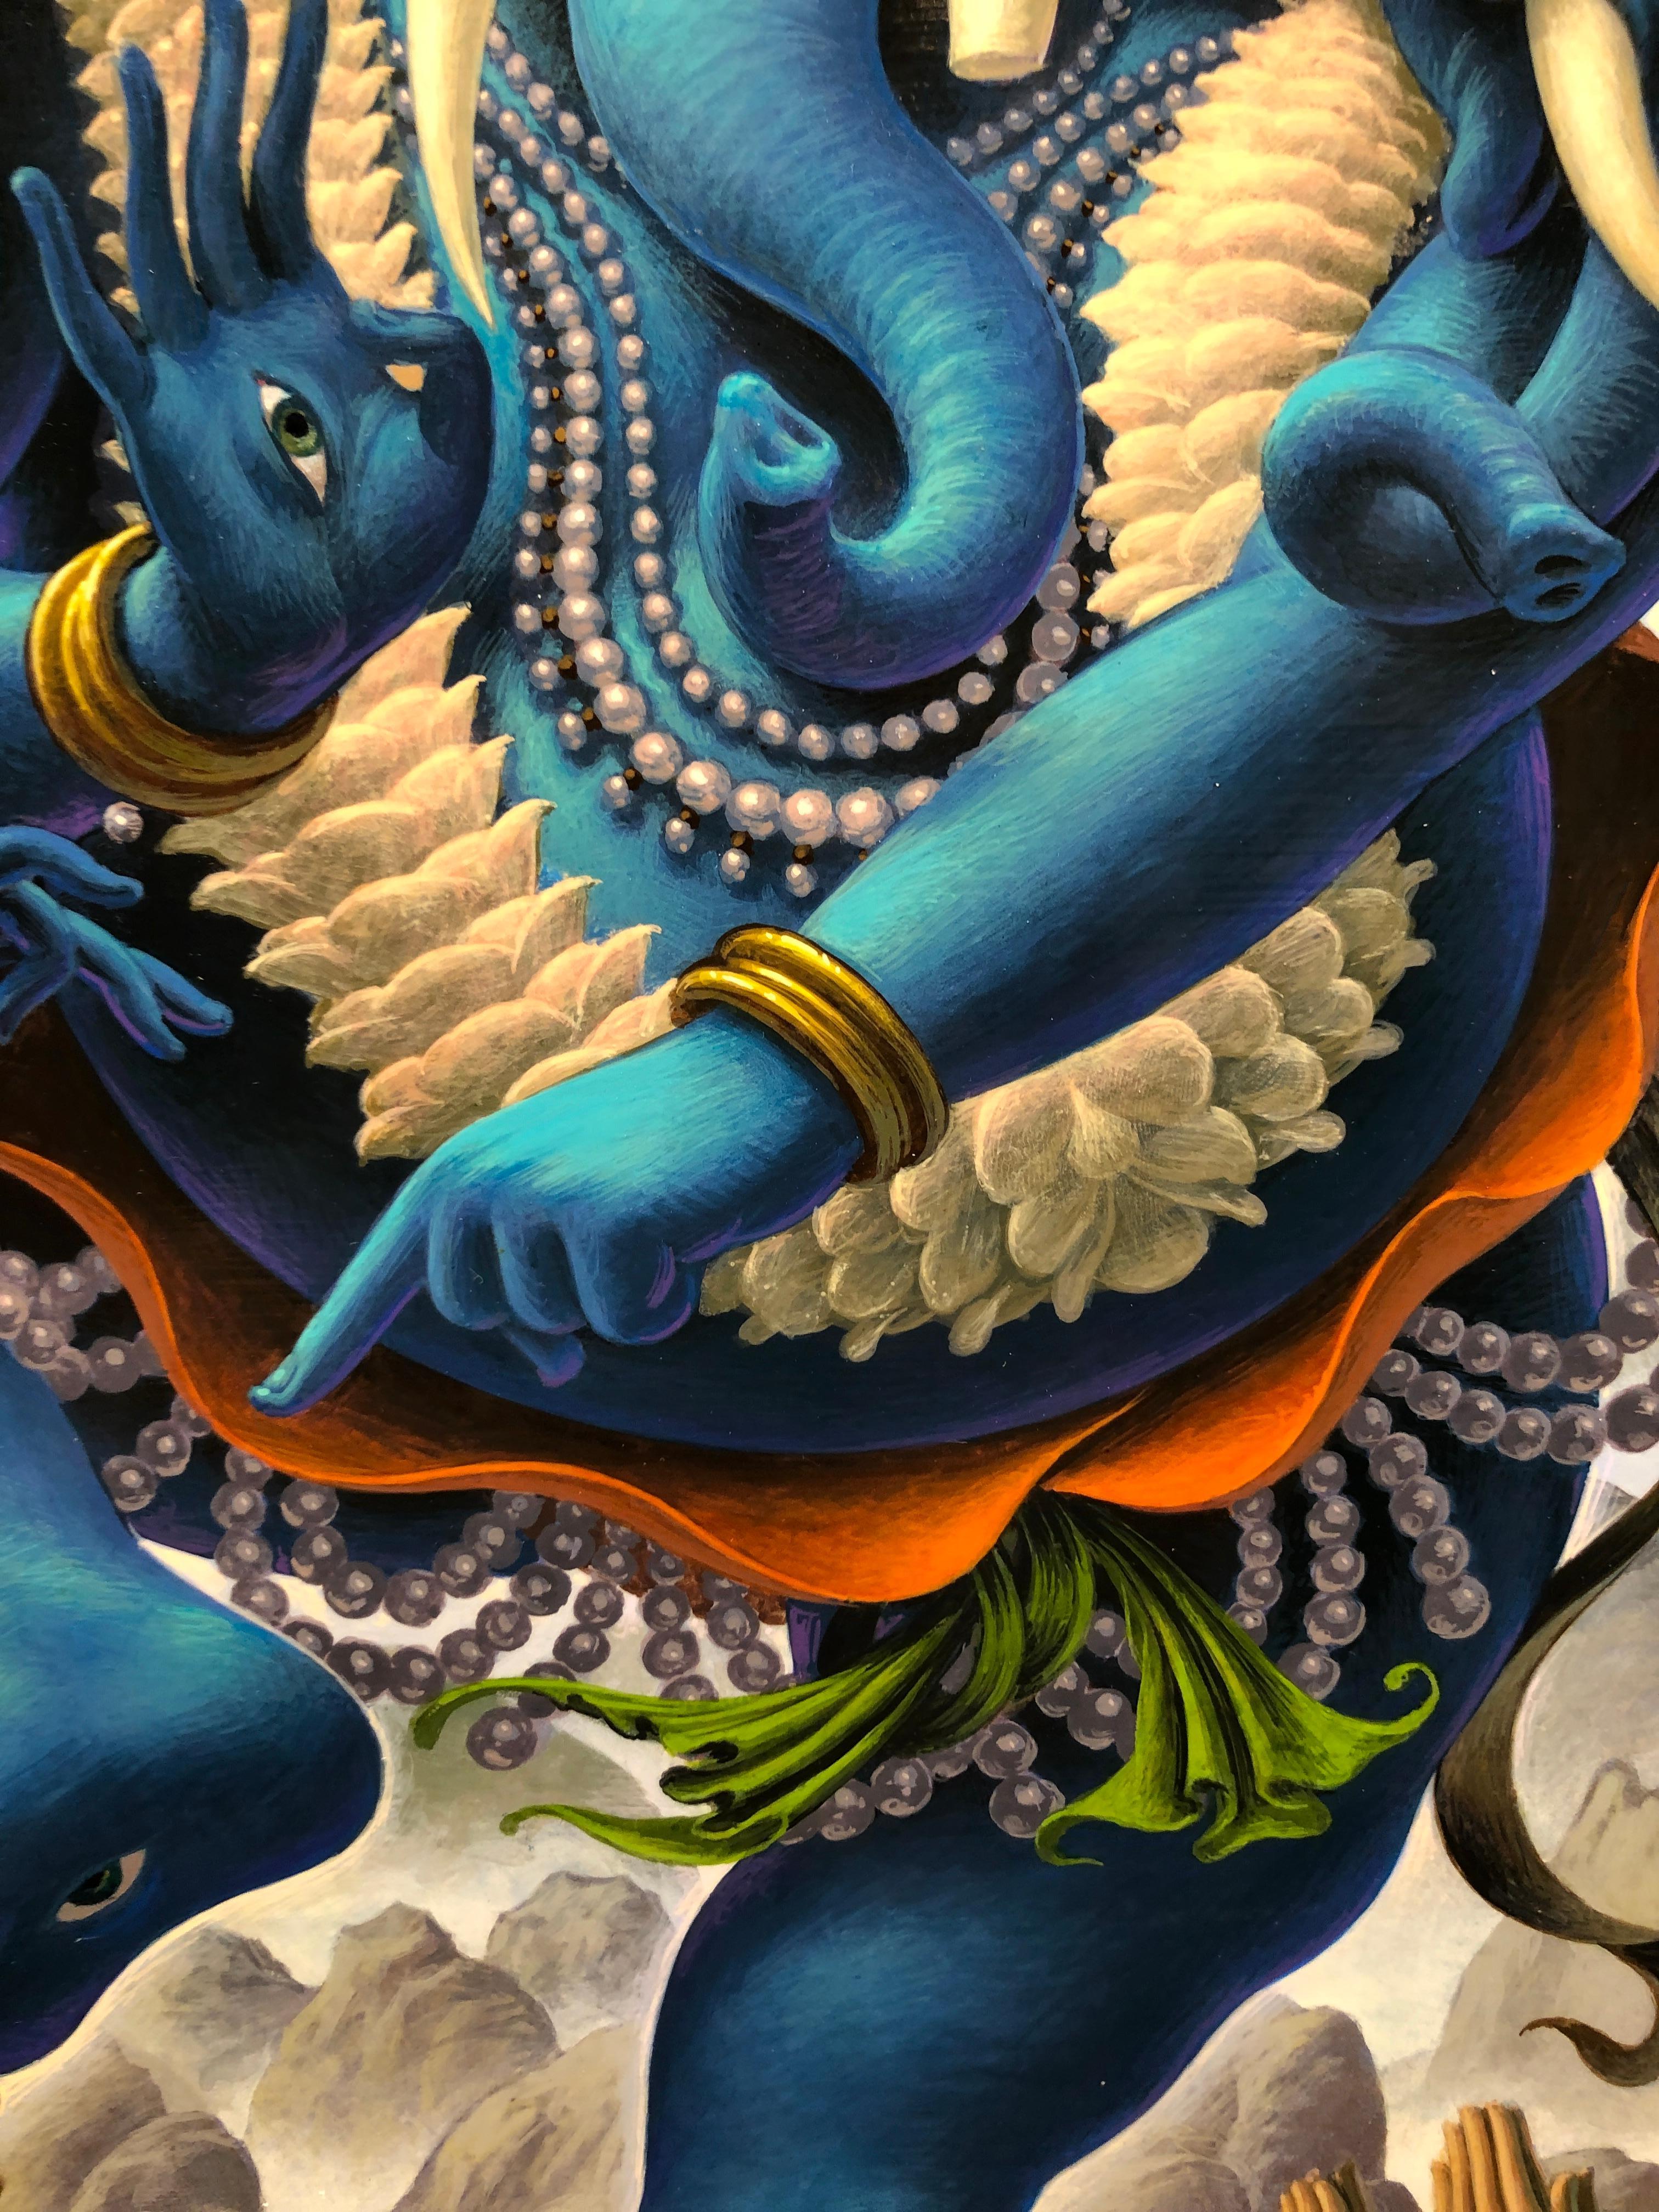 Ganesh at the Maelstrom - Highly Detailed Surreal, Symbolic Painting 10